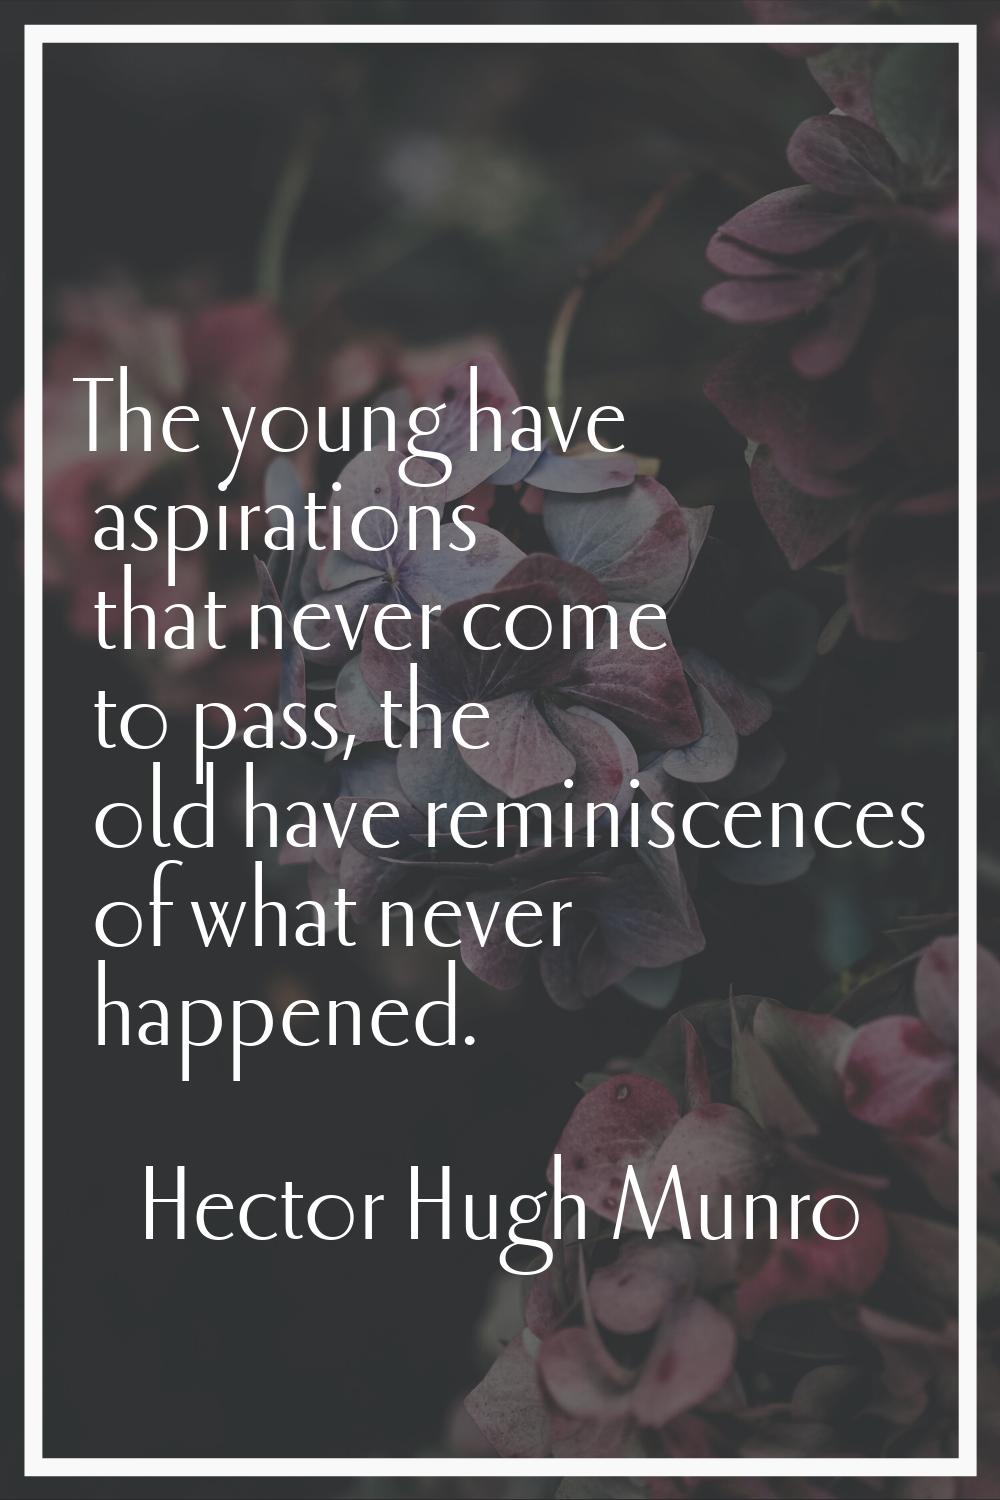 The young have aspirations that never come to pass, the old have reminiscences of what never happen